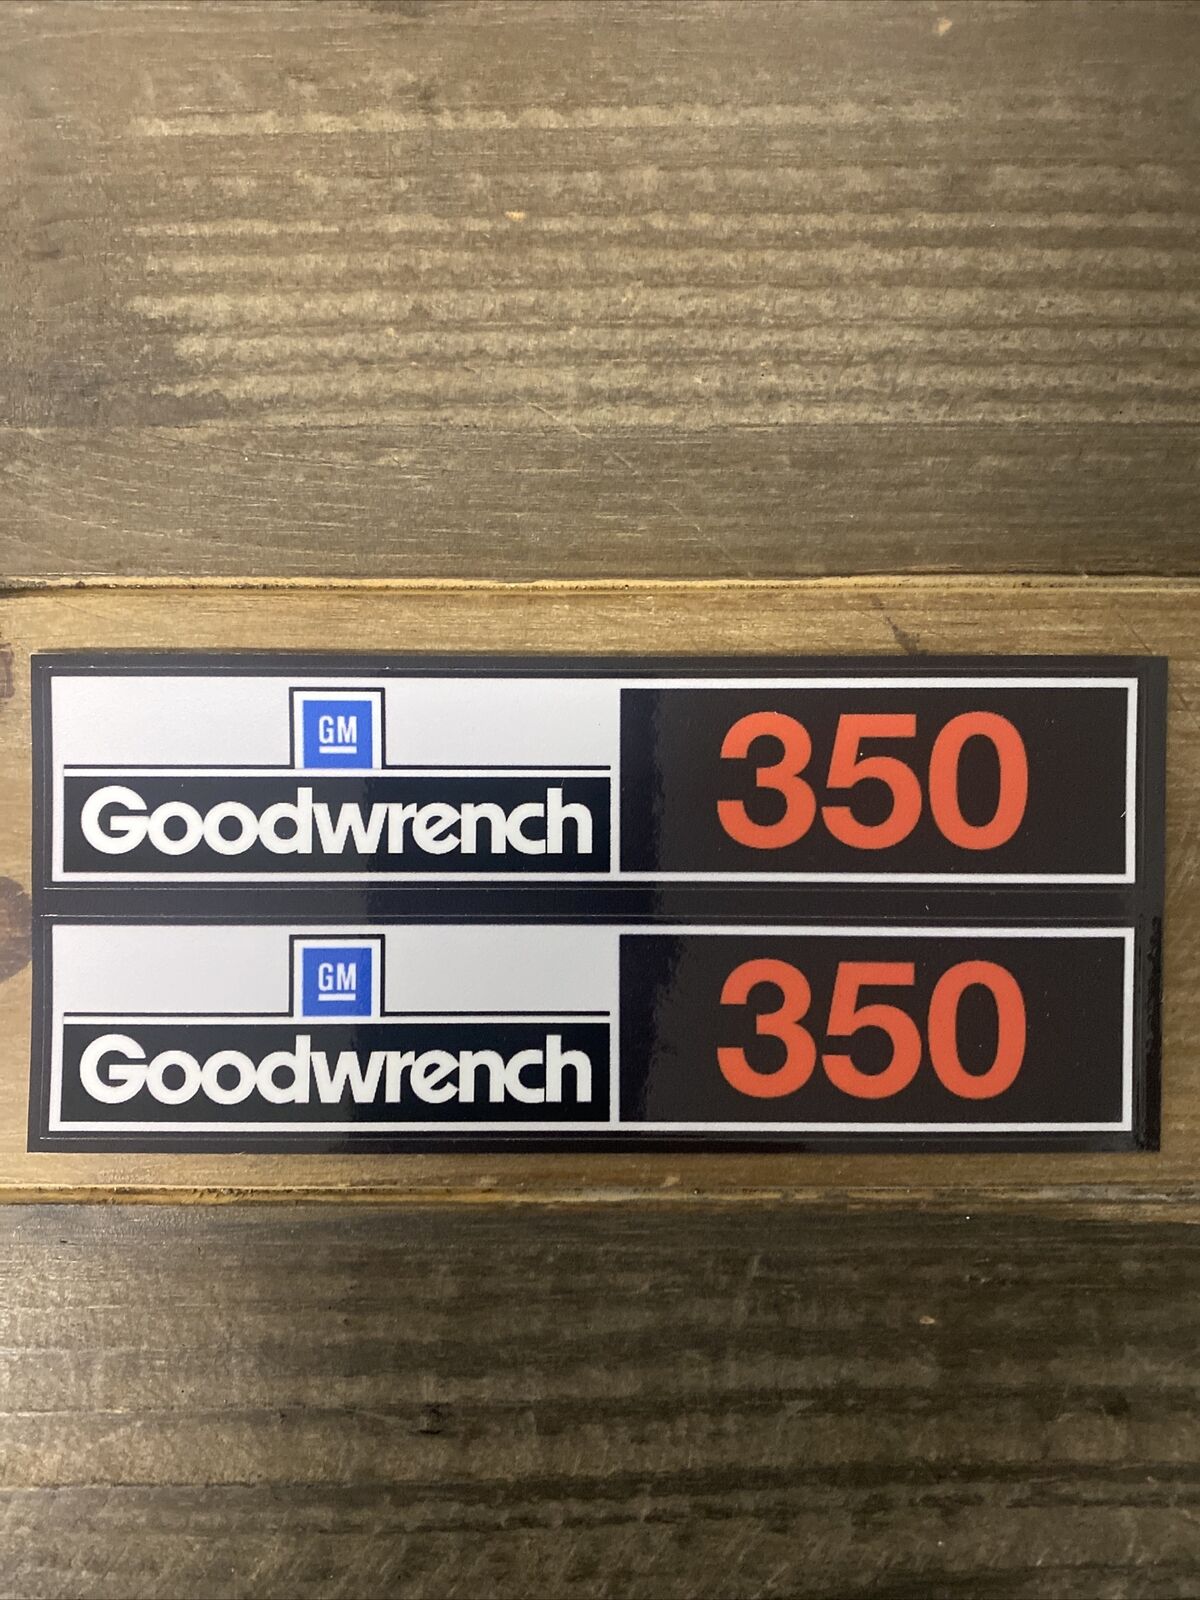 2 Goodwrench ENGINE VALVE COVER DECALS GM CHEVROLET CHEVY Quality OEM 3M Sticker